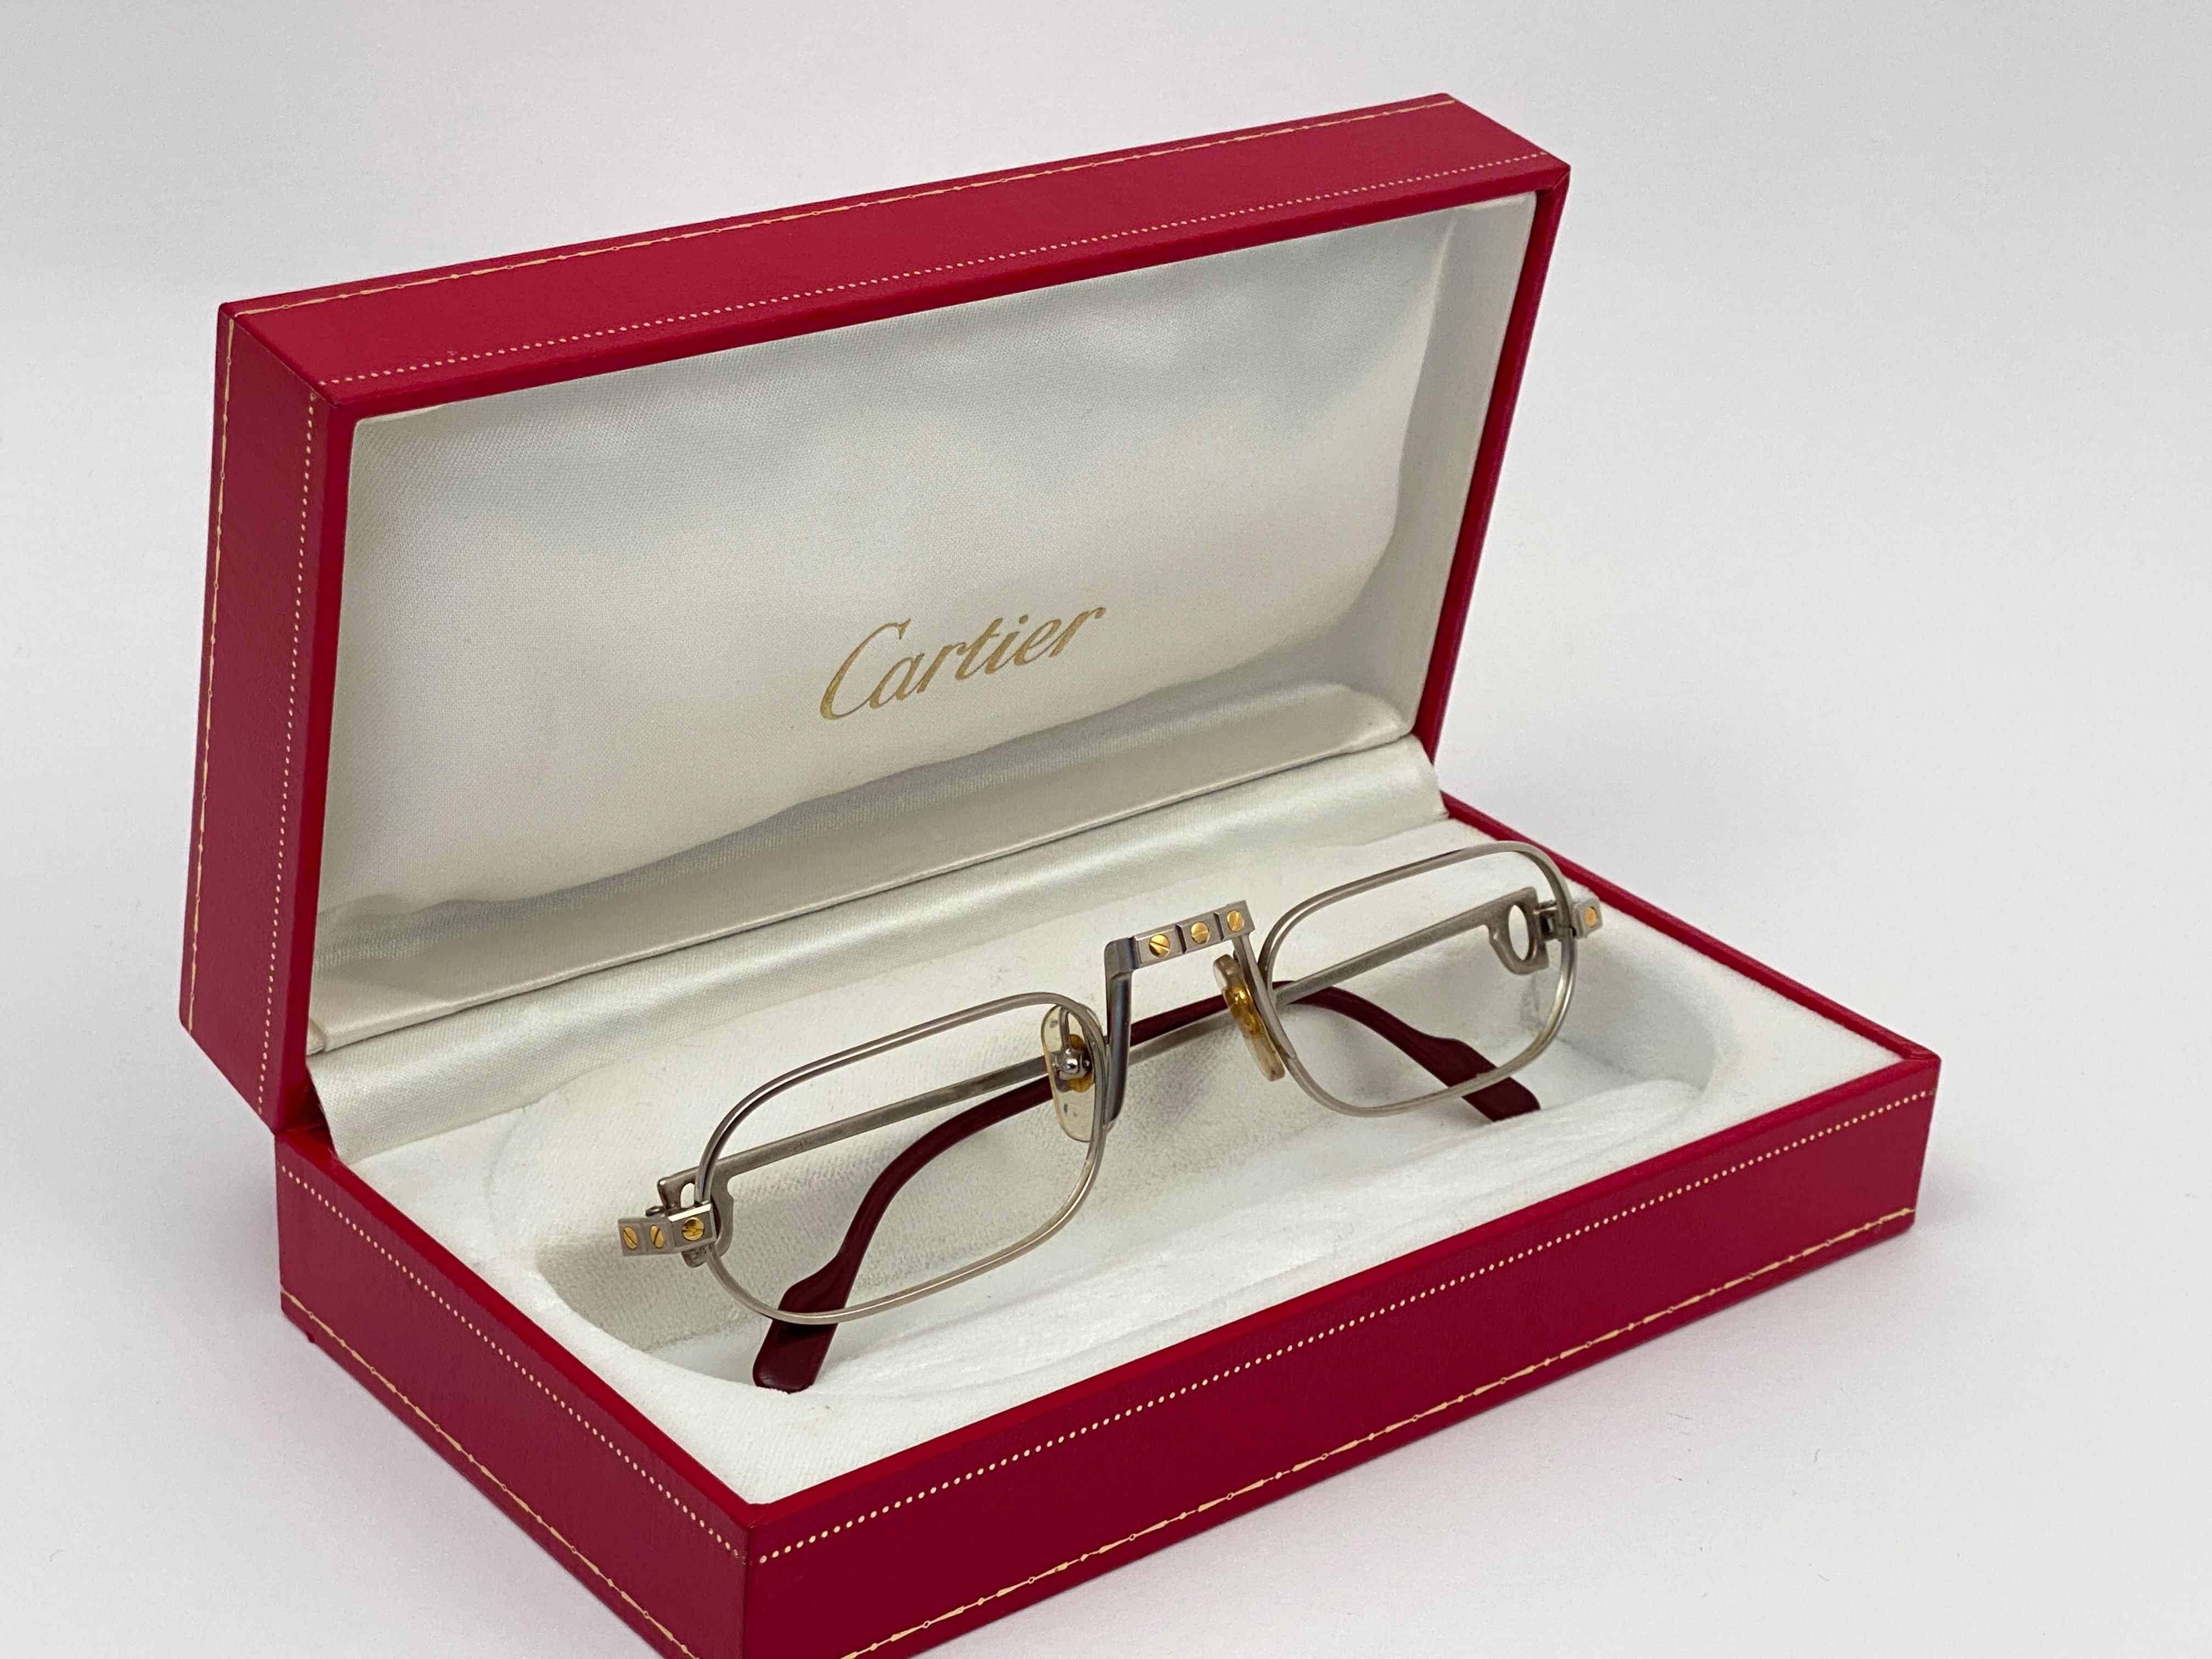 Original 1983 Cartier Demilune Cartier Santos Platine sunglasses ready for RX / prescription lenses. 

Very comfortable as reading glasses. All hallmarks. Red enamel with Cartier gold signs on the burgundy ear paddles. Both arms sport the C from